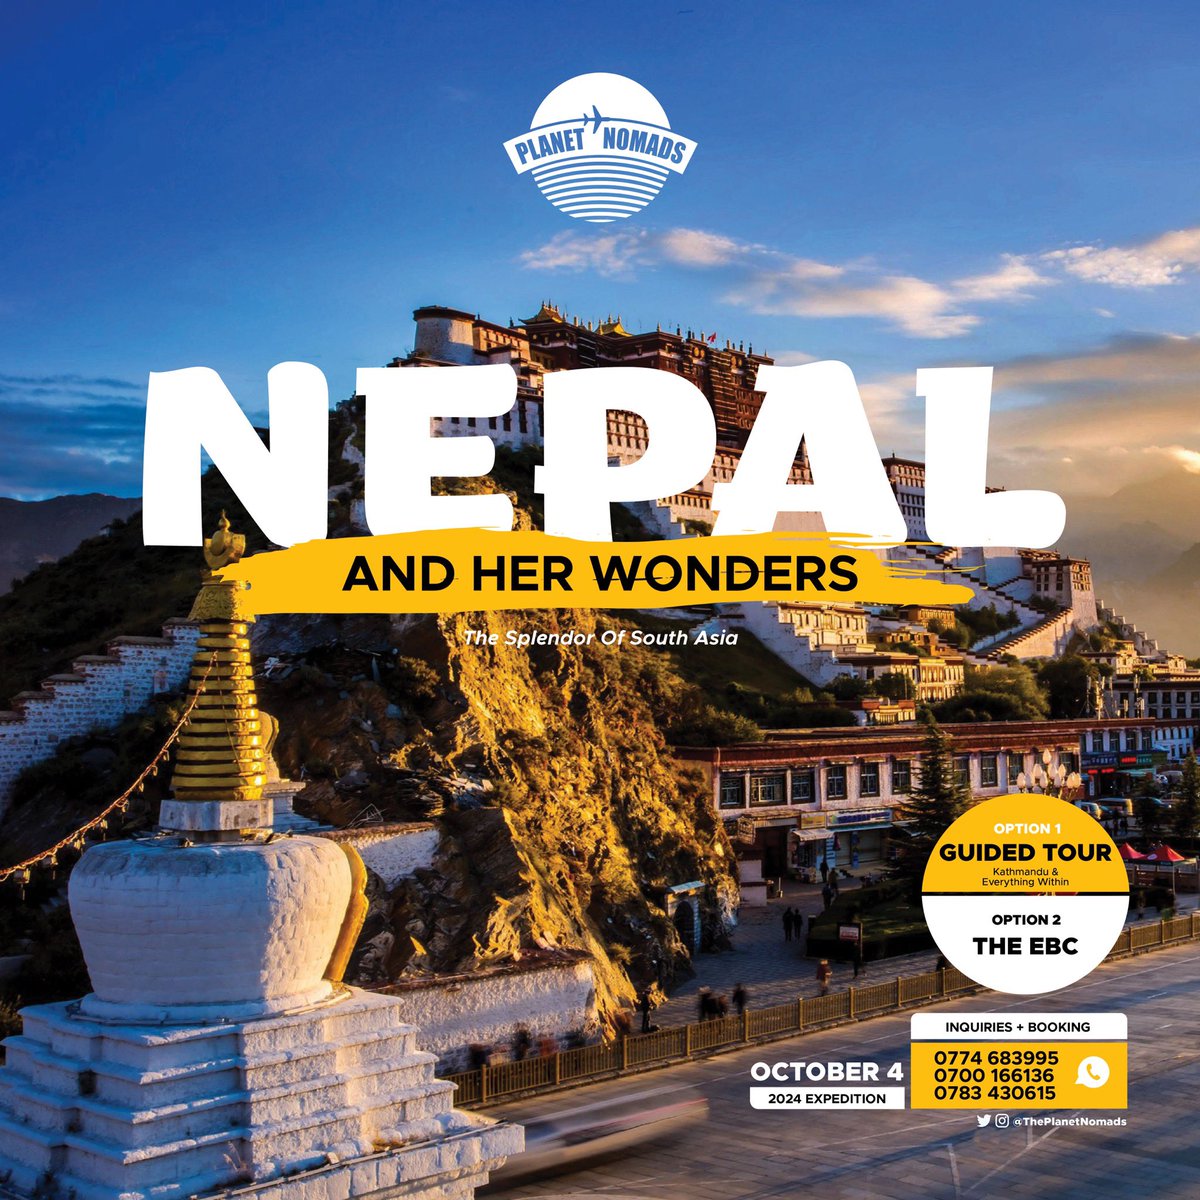 Whether you simply want to explore Nepal’s most treasured sites in #Kathmandu & get immersed in its colorful monasteries, diversity of art & the medieval culture or you are lured by the call of mountains & seek to trek to the famous Base Camp, the #EBC—#Nepal 🇳🇵has it all!